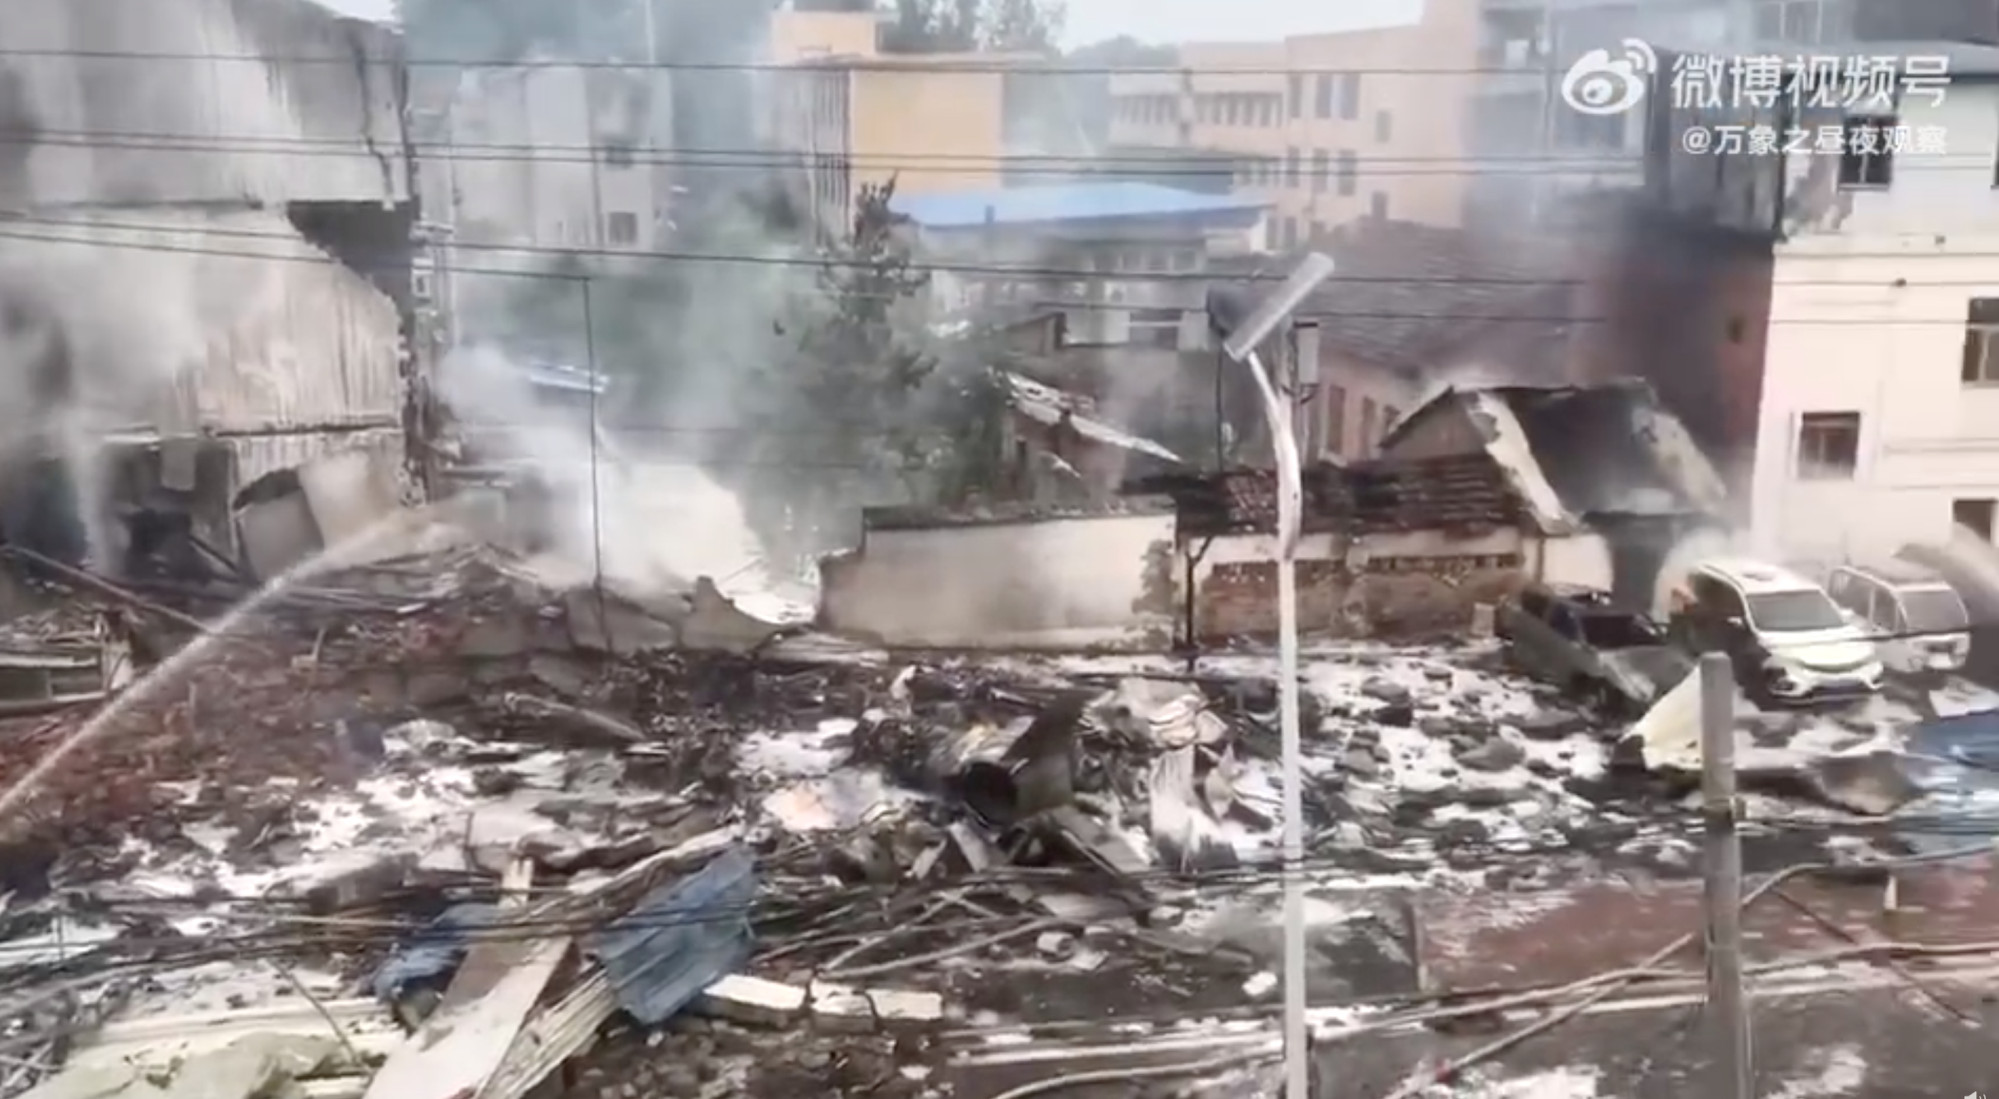 Video captured at the scene of the plane crash showed damage to buildings. Photo: Weibo